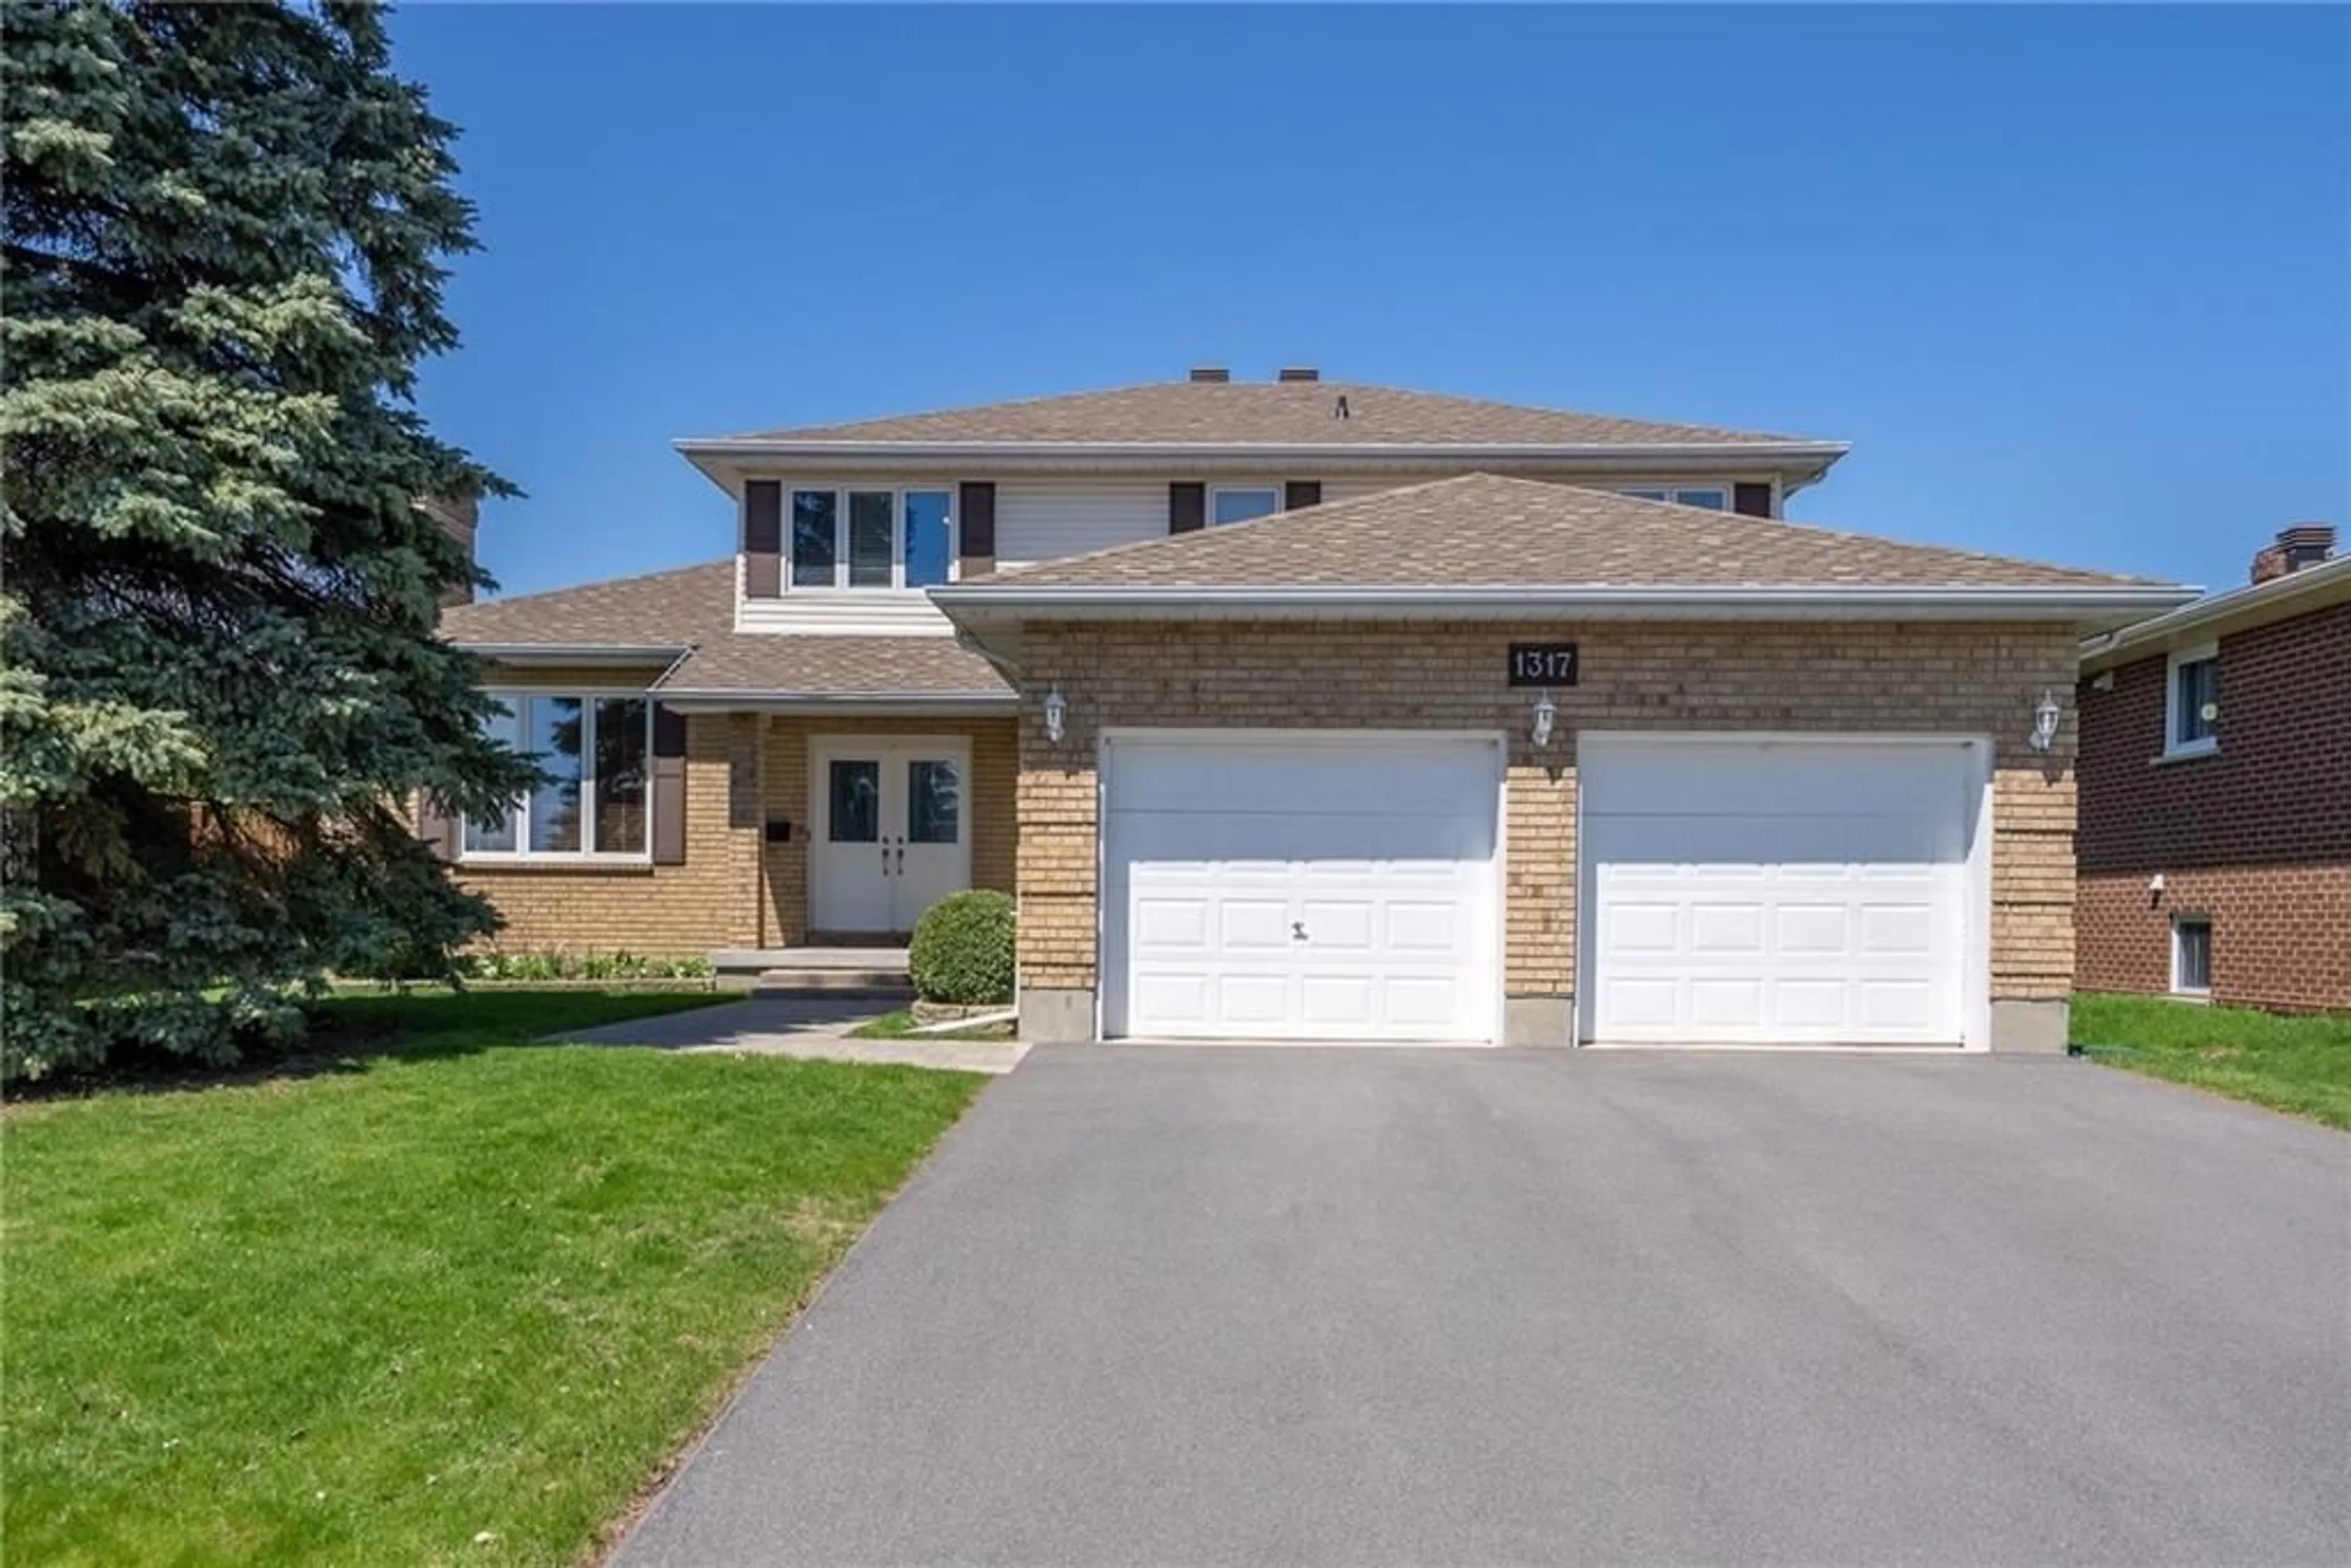 Frontside or backside of a home for 1317 STORMONT Dr, Cornwall Ontario K6H 6Y3